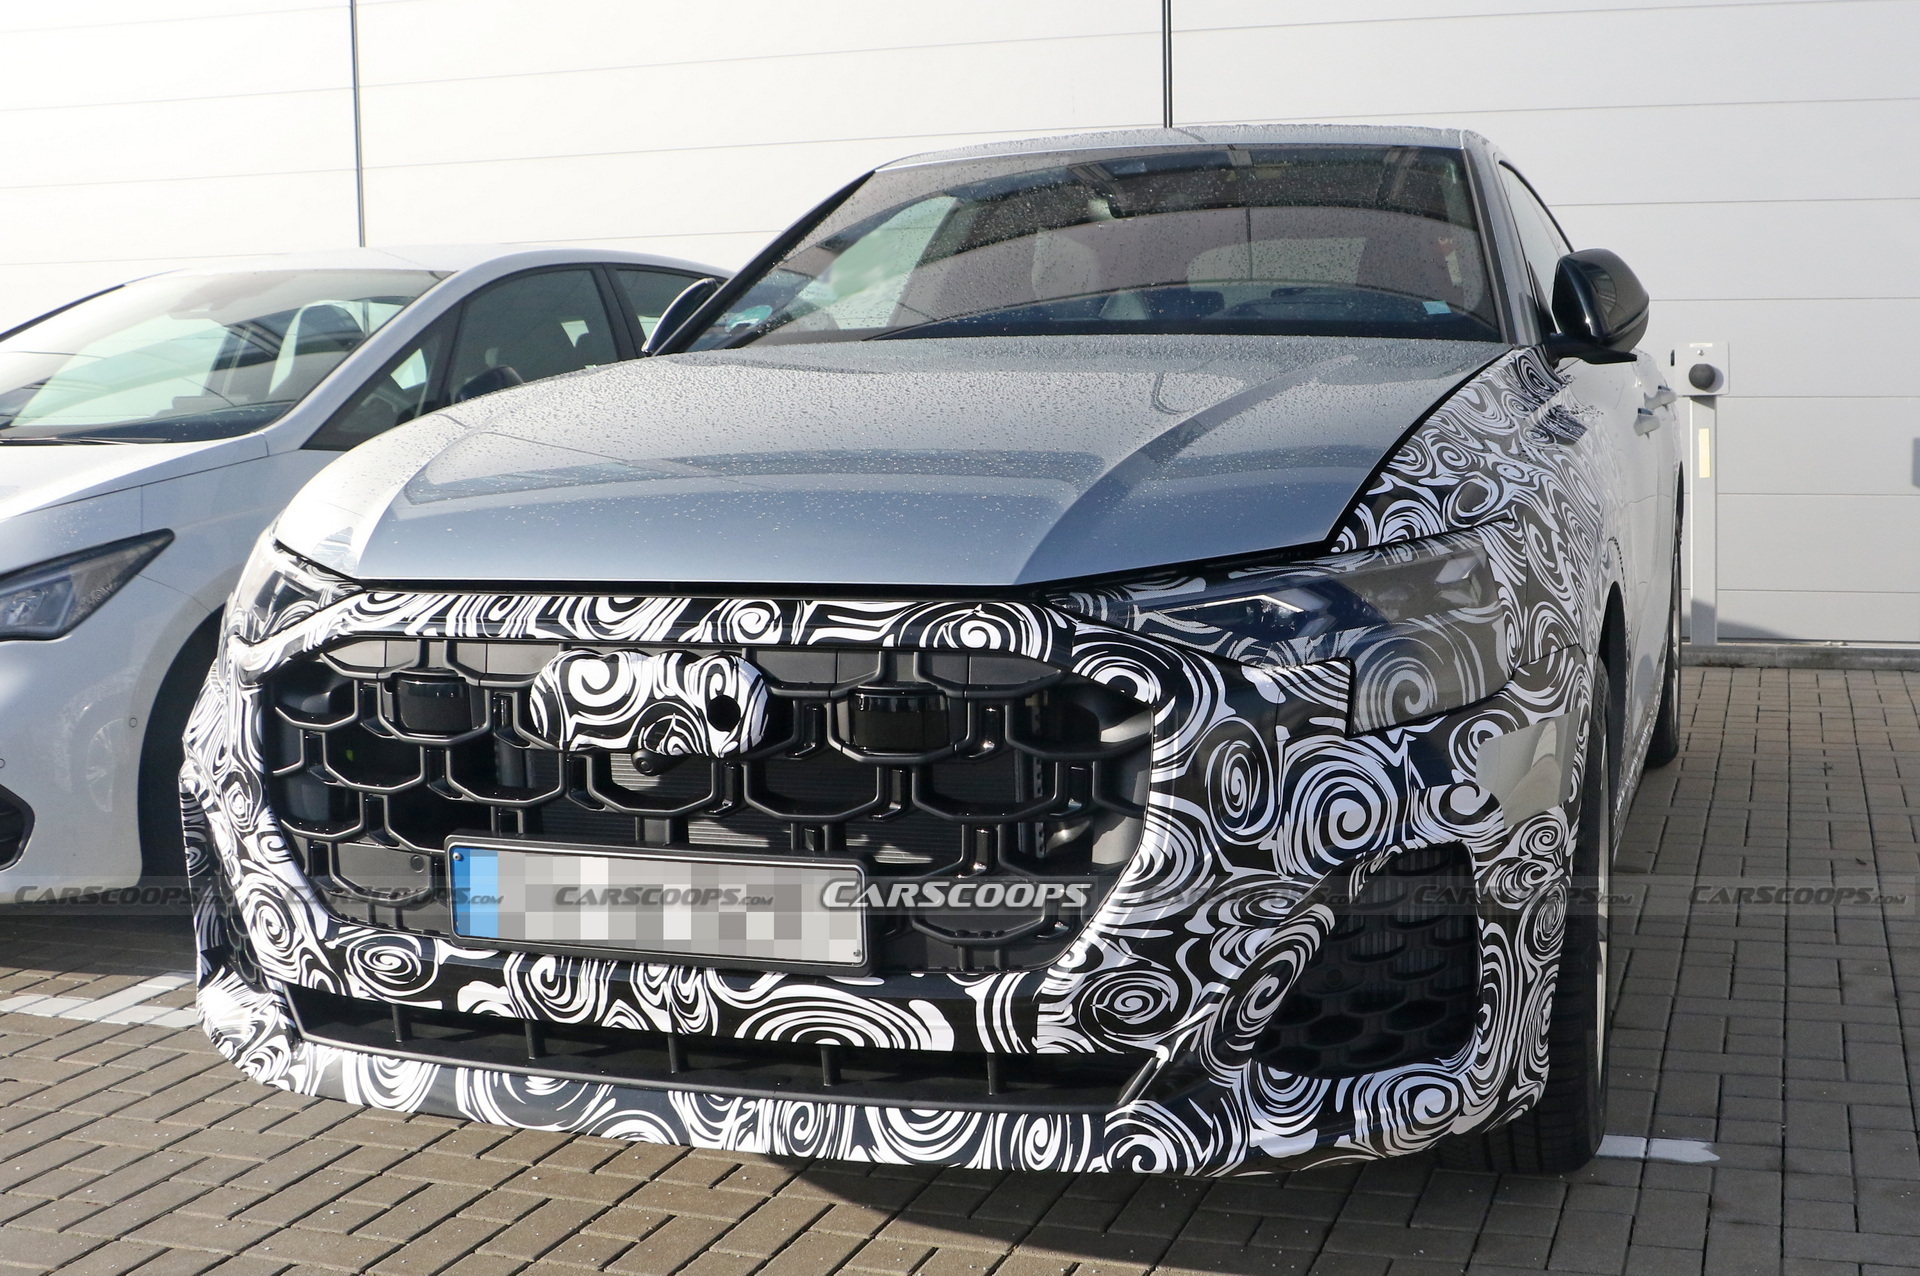 News of the Upgraded Audi Q8 - Archibalds